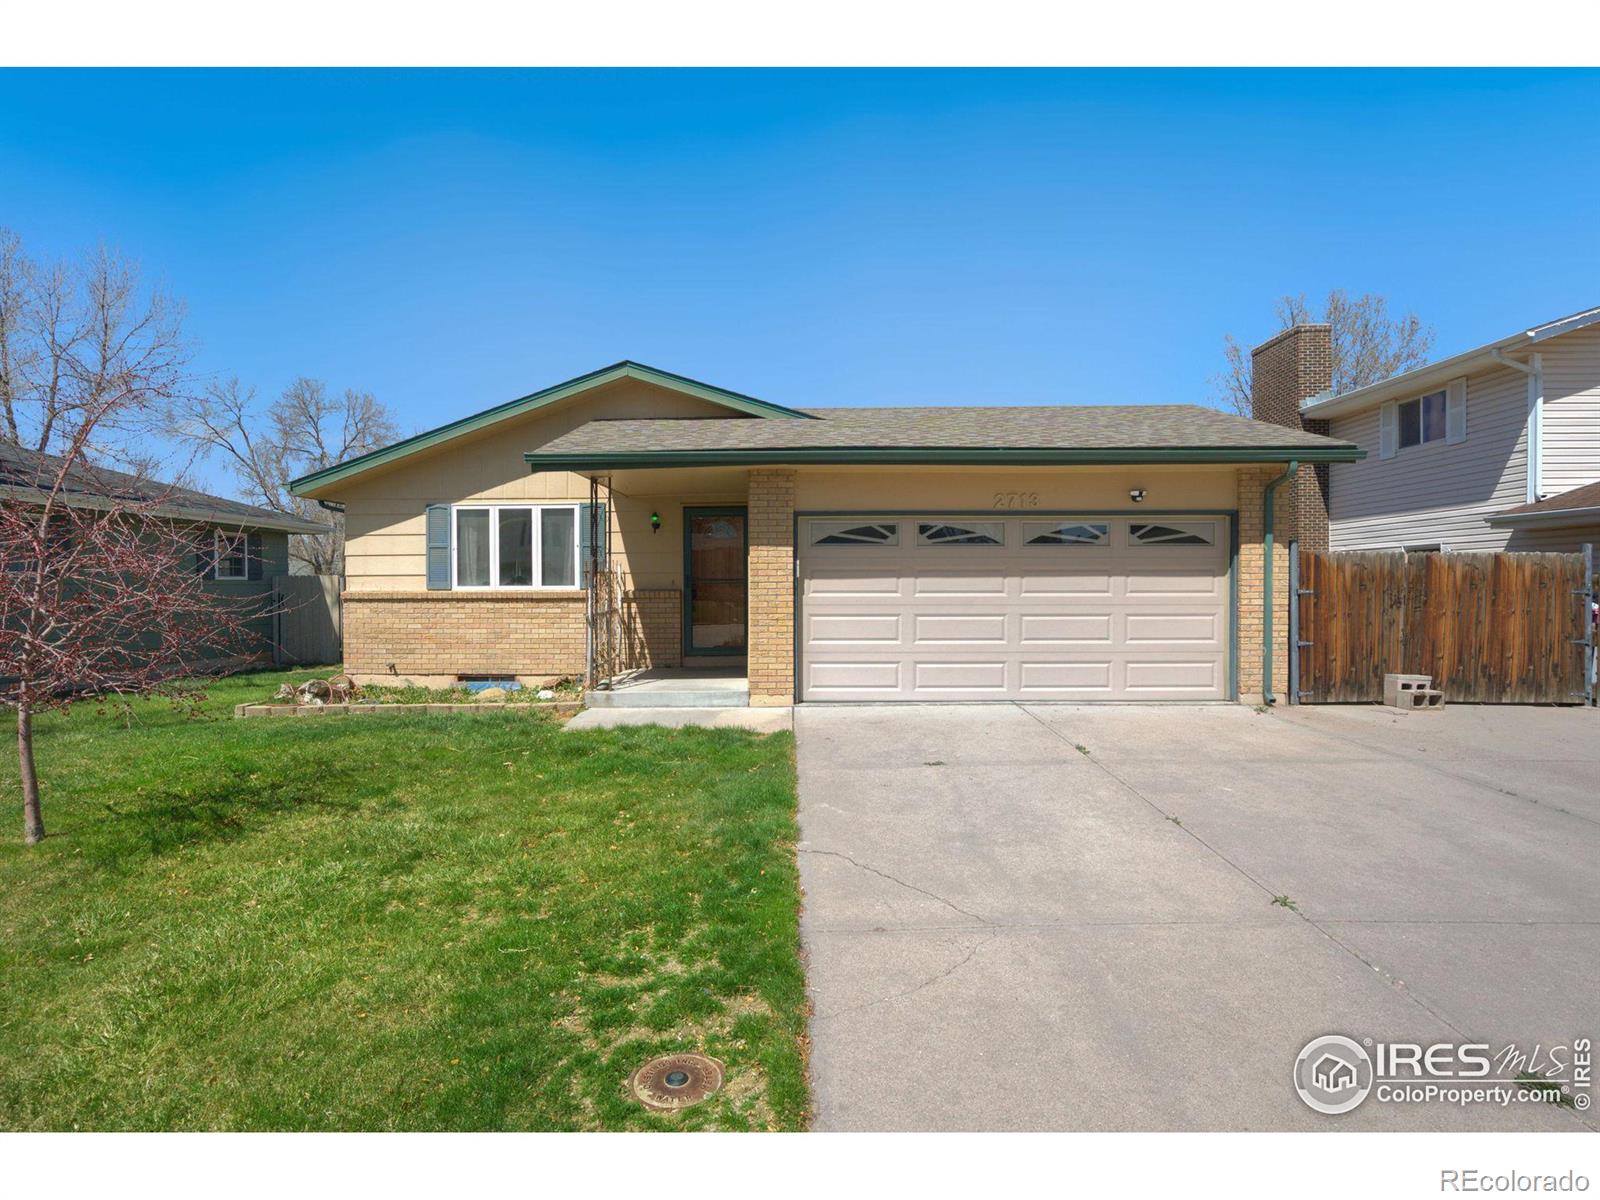 2713 W 19th St Rd, greeley MLS: 4567891006966 Beds: 6 Baths: 3 Price: $400,000